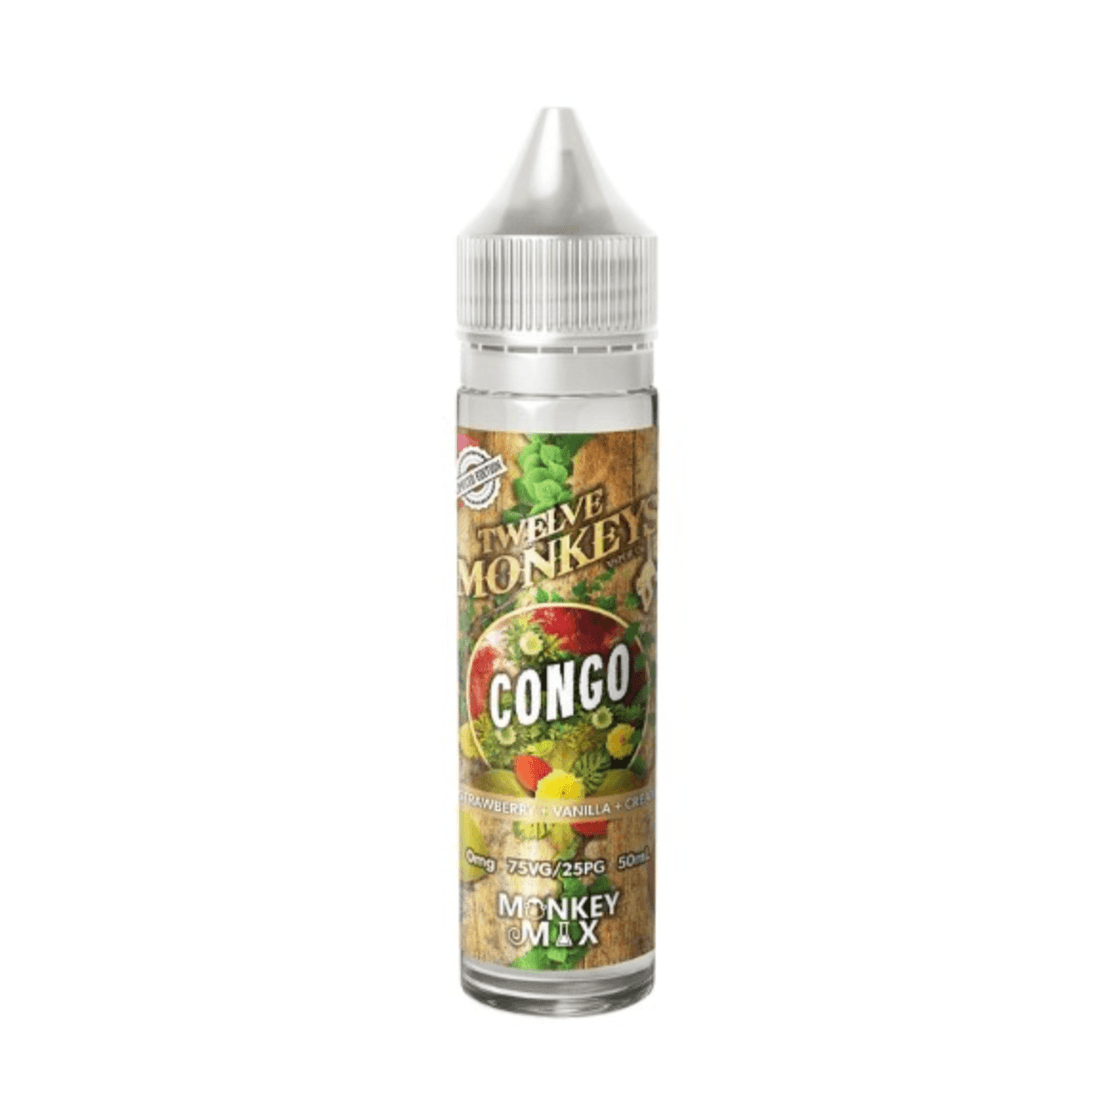 CONGO 50ML SHORT FILL BY TWELVE MONKEY - LIMITED EDITION - Vapeslough